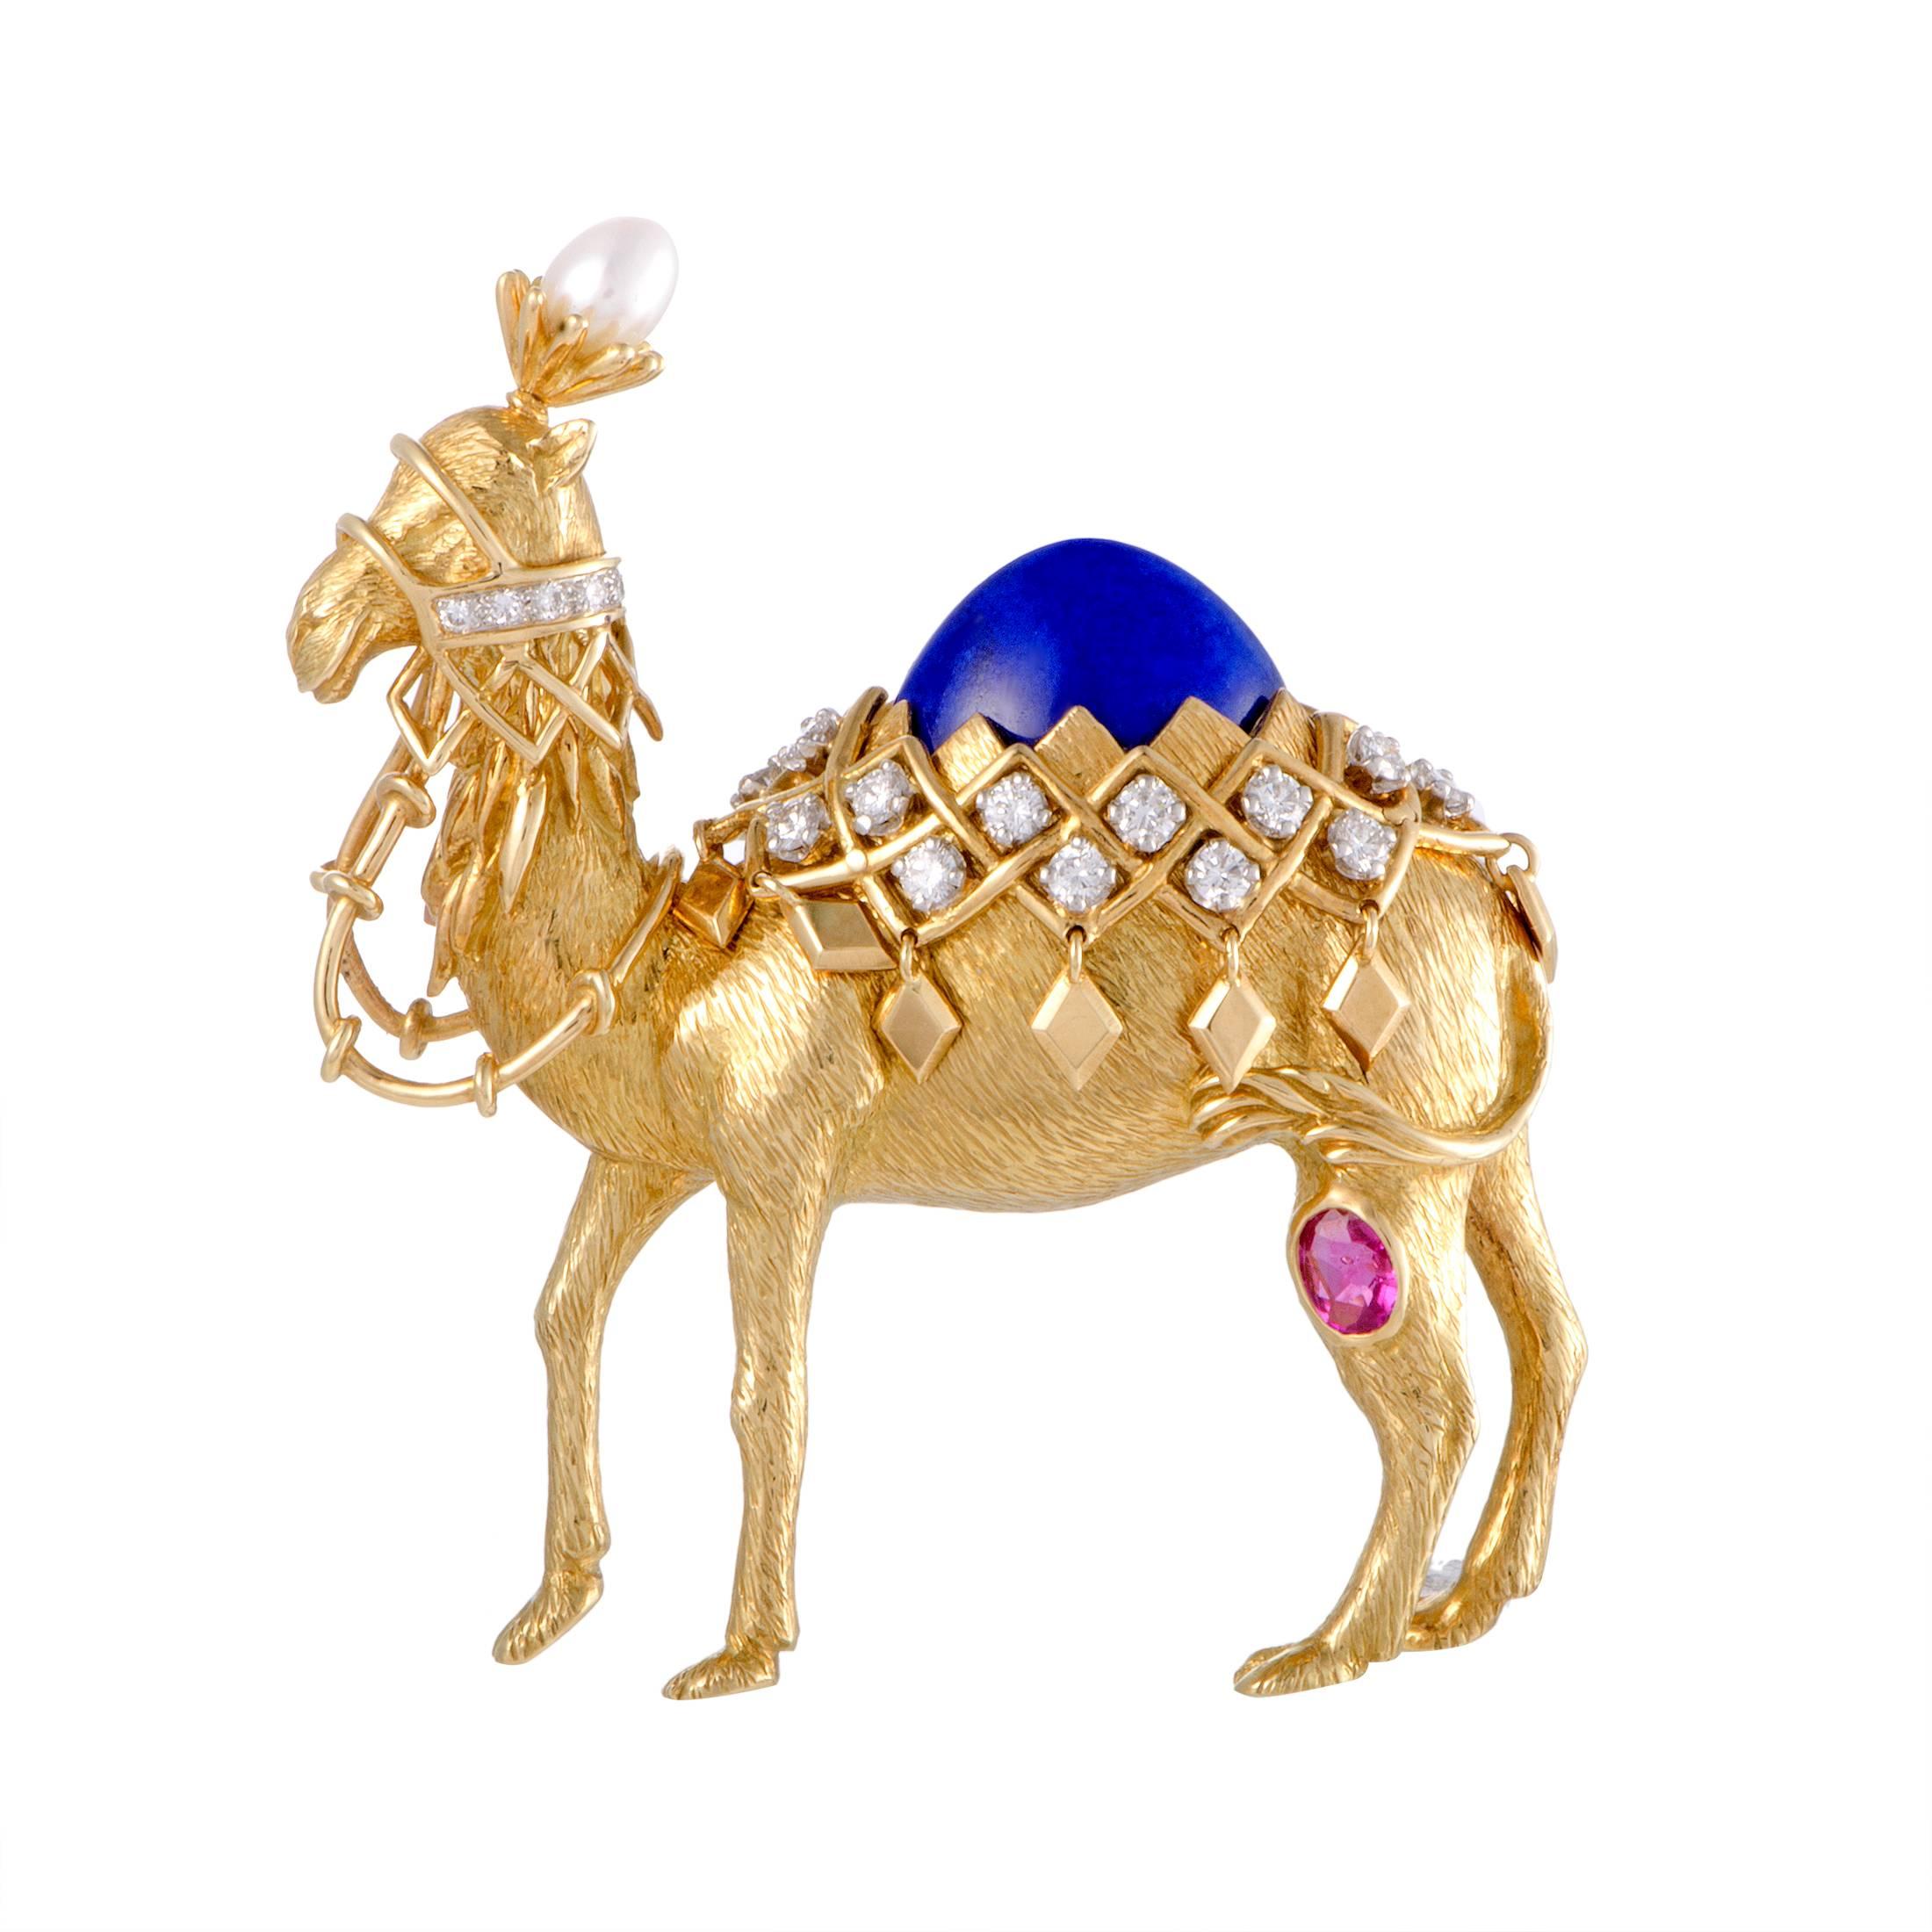 Tiffany & Co. Schlumberger Diamond Pearl Ruby and Lapis Lazuli Camel Brooch